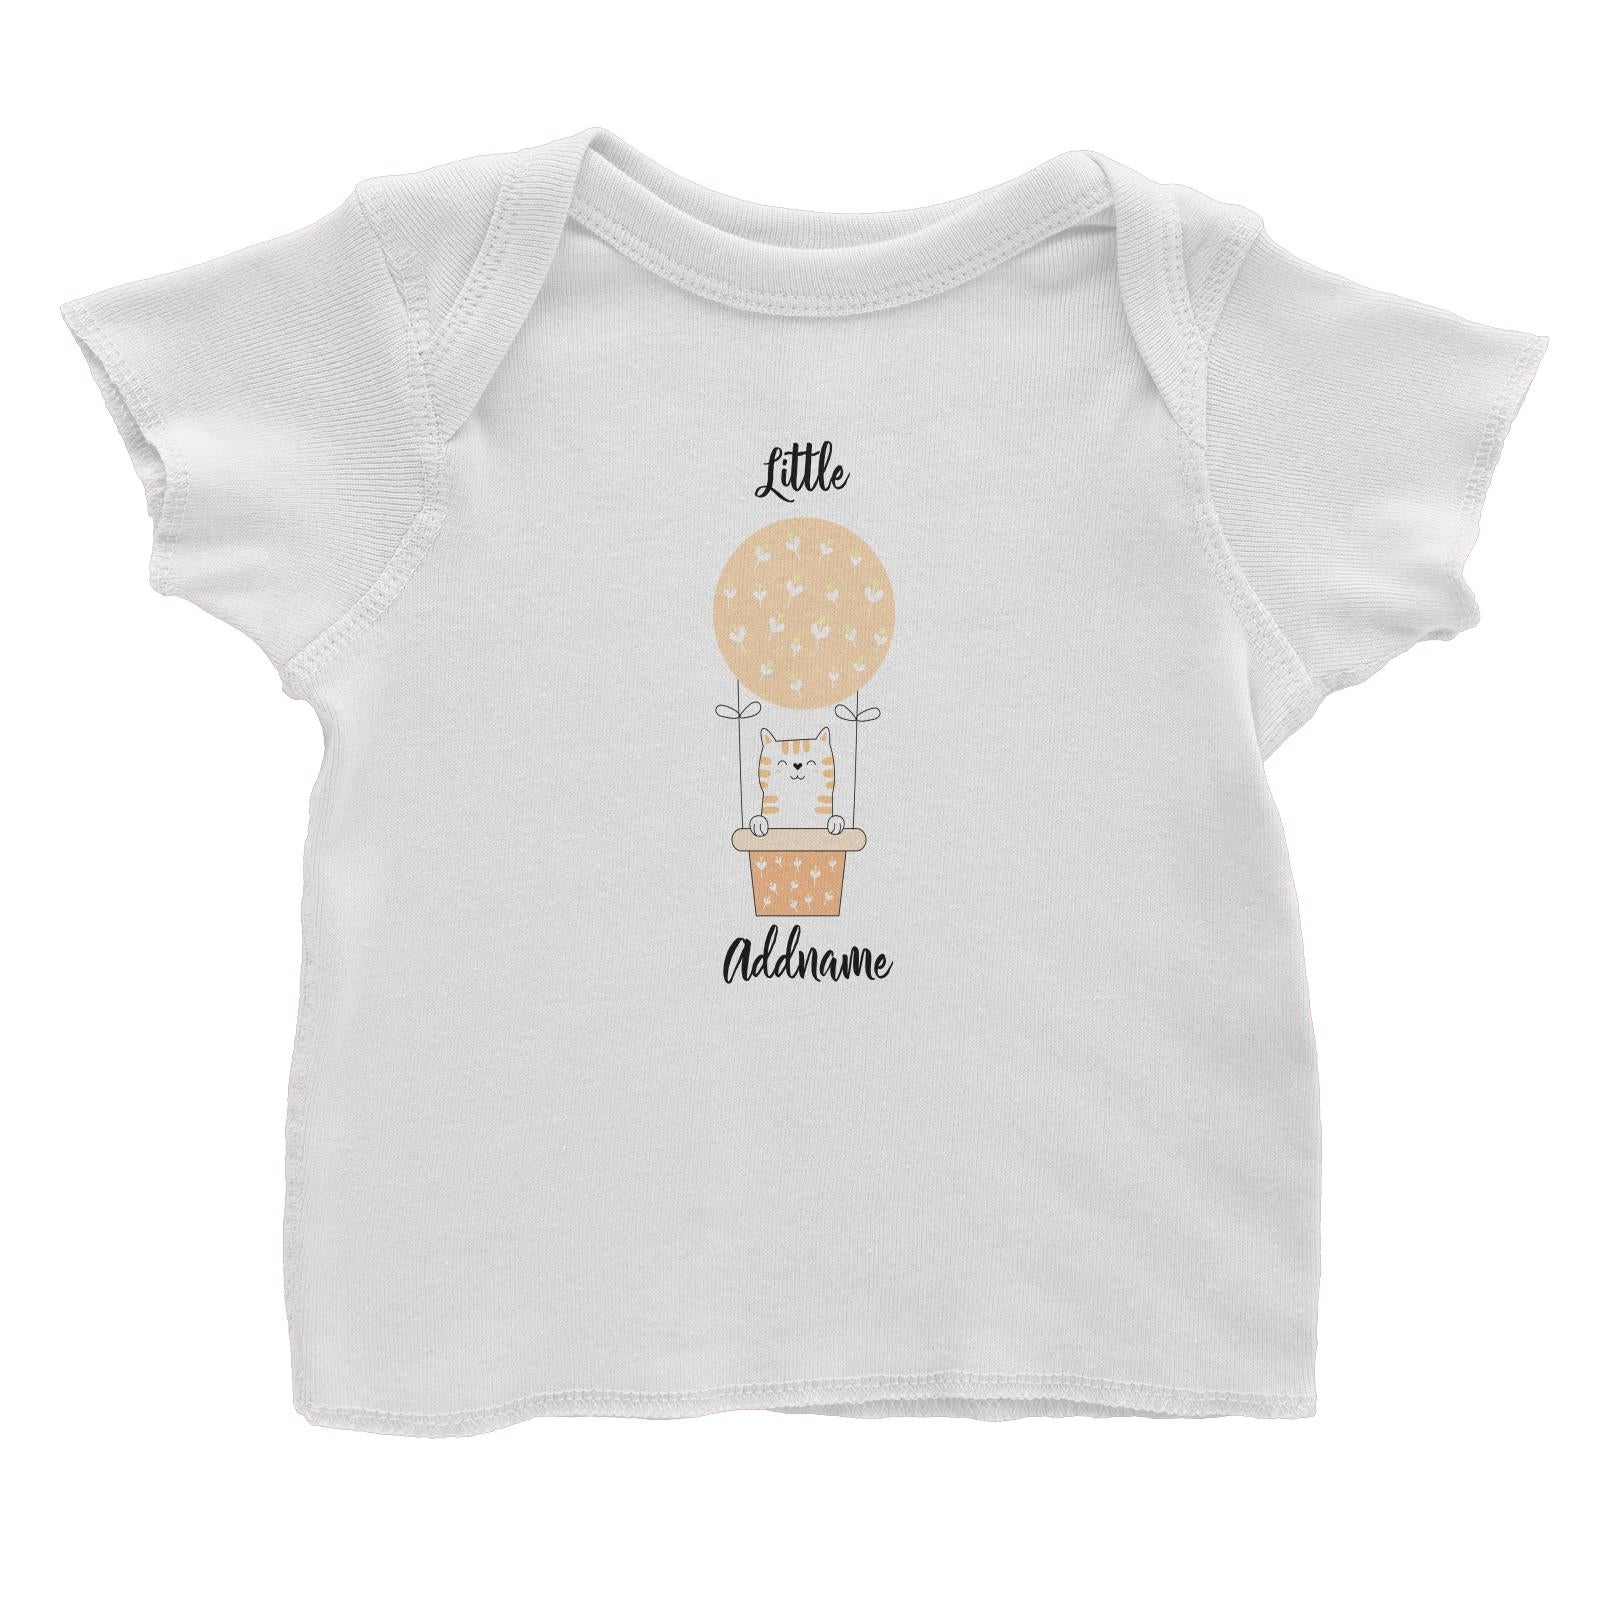 Cute Air Balloon with Brown Cat Addname Baby T-Shirt